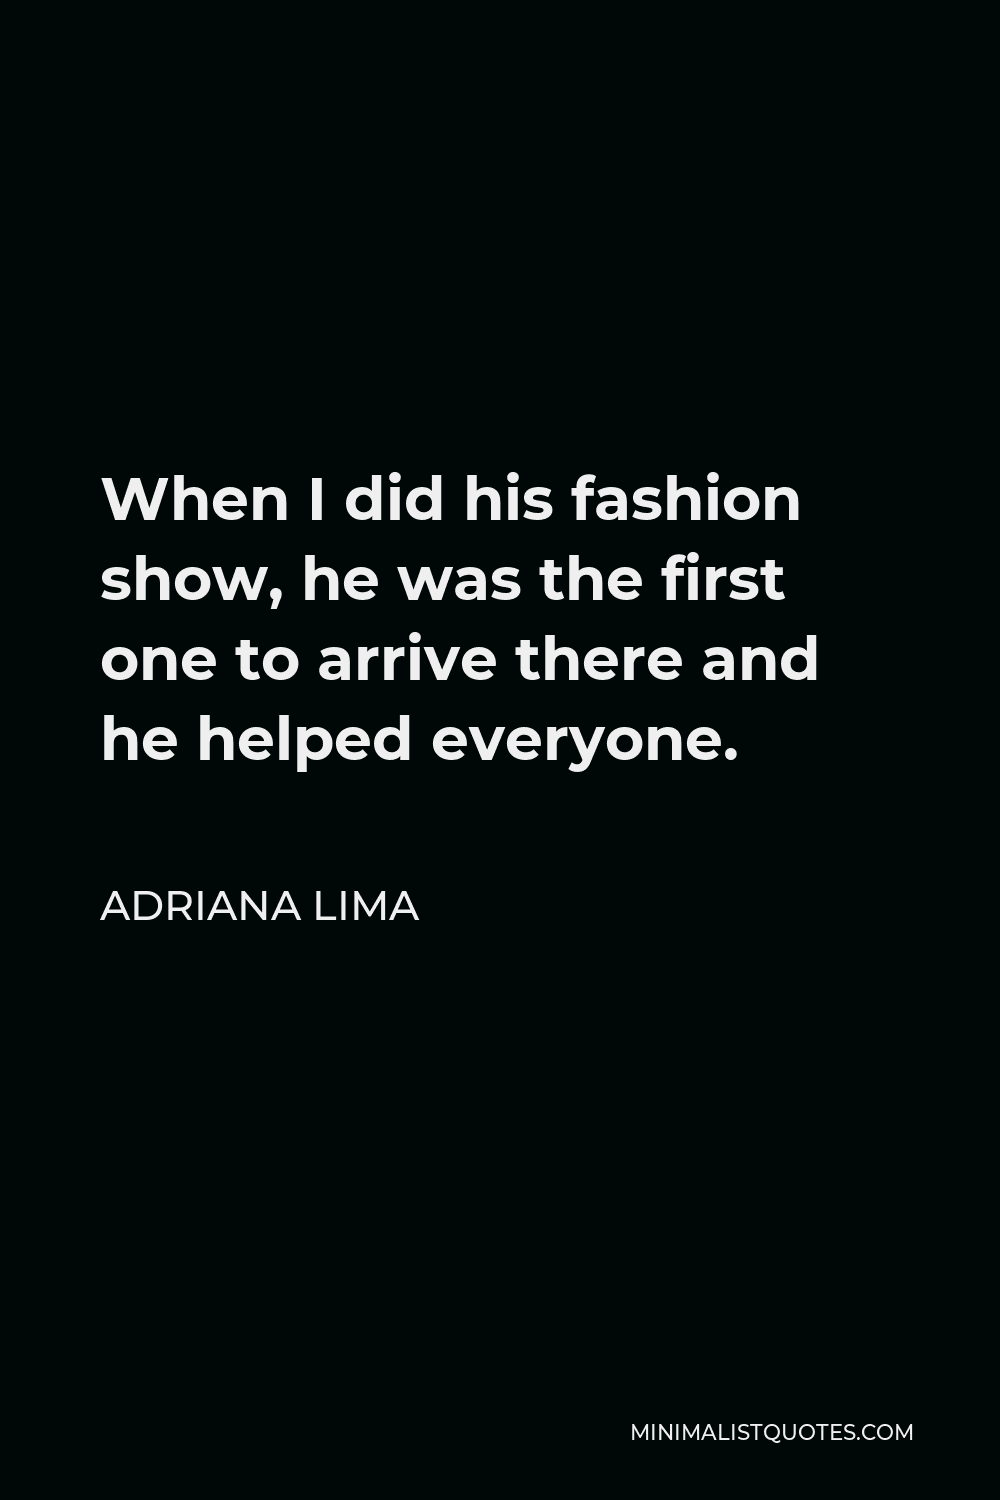 Adriana Lima Quote - When I did his fashion show, he was the first one to arrive there and he helped everyone.